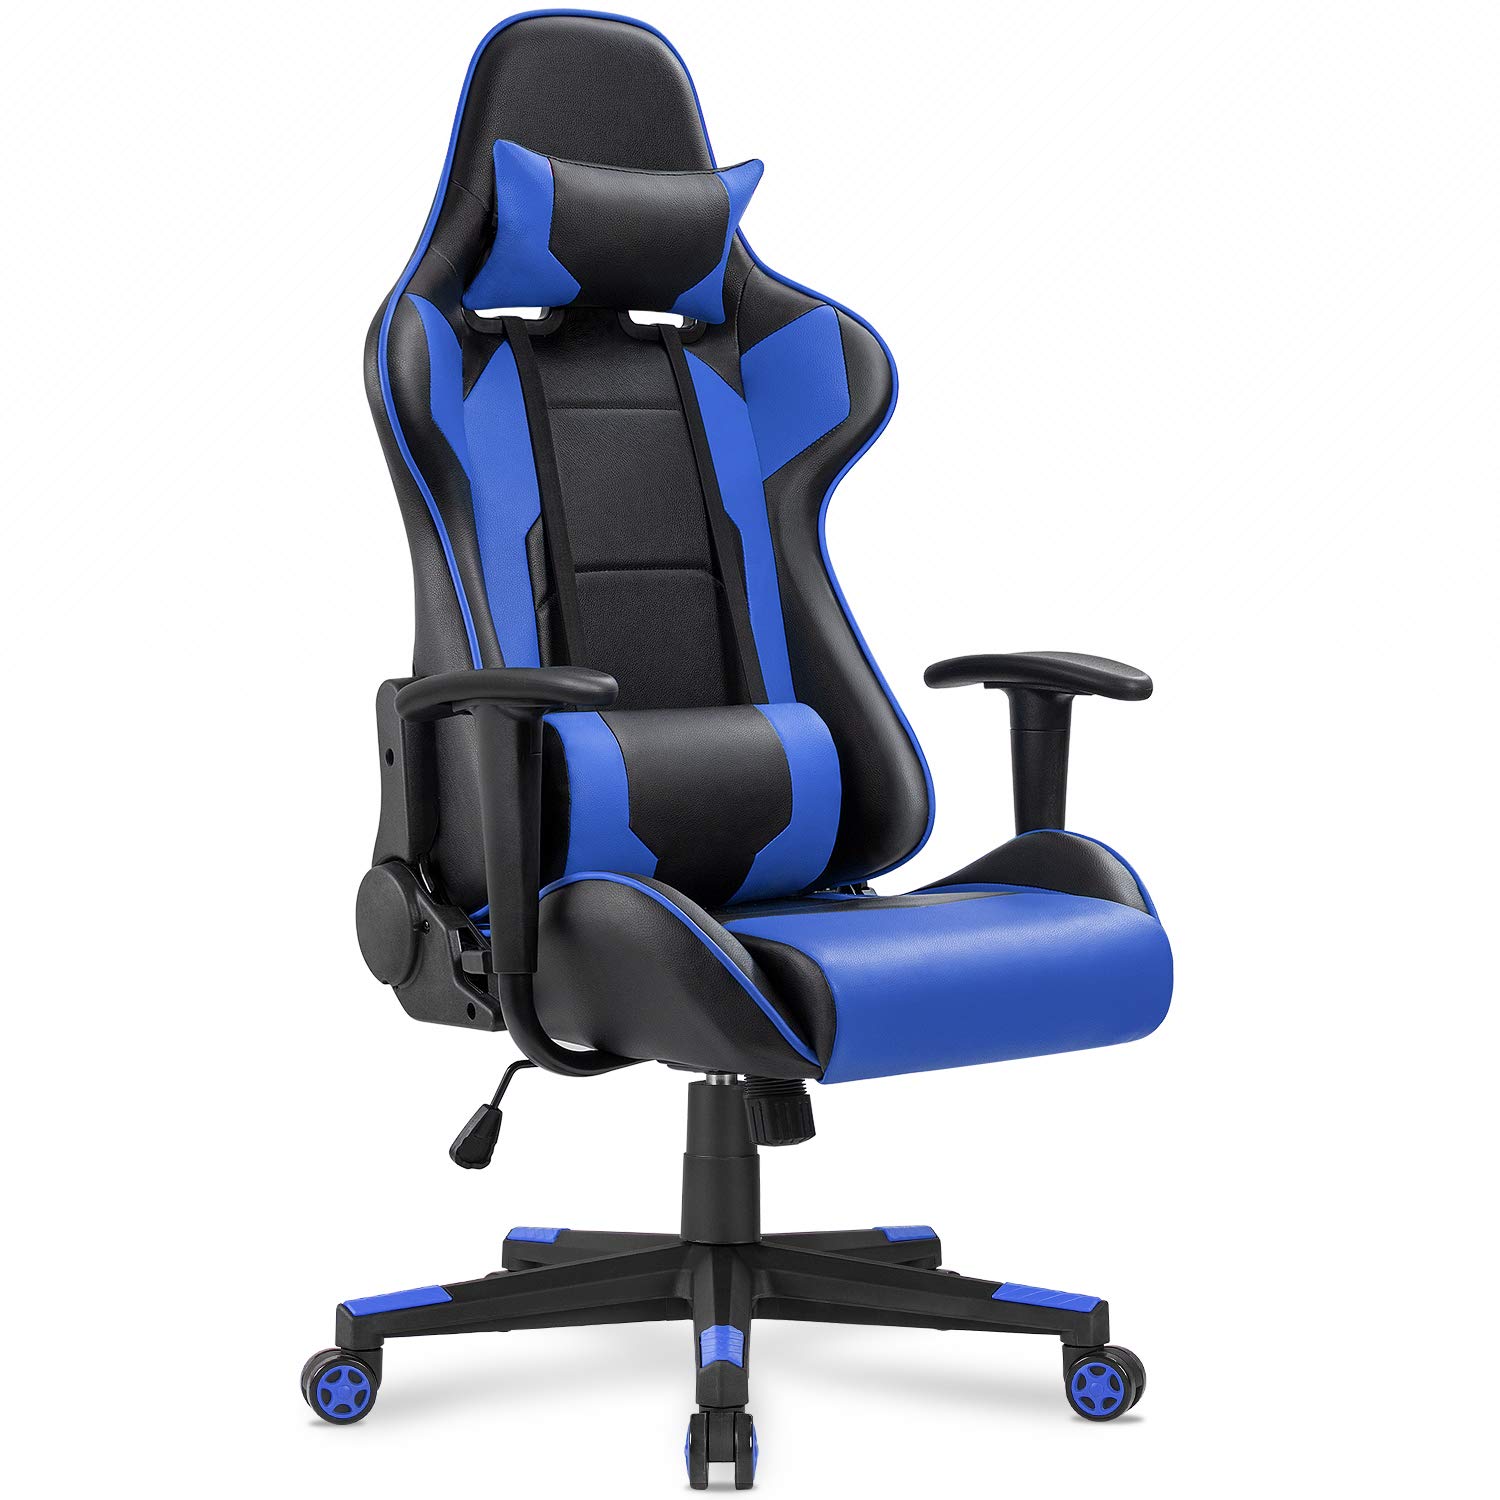 Homall Gaming Chair Review - UltimateGameChair